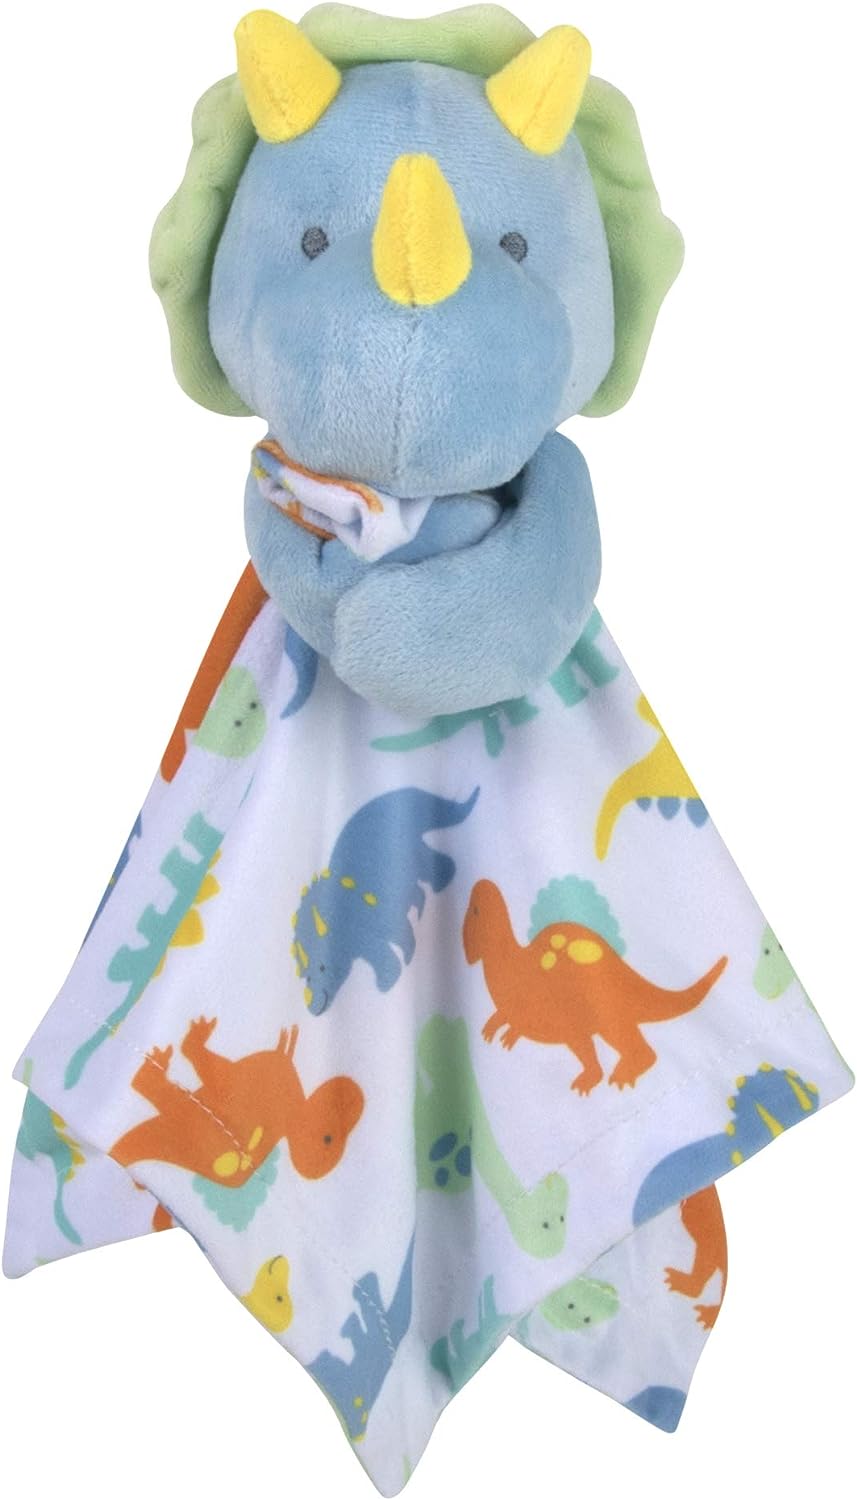 Minky Animal Snuggler Lovey Blanket for Kids, Babies, Boys, Girls, Gender Neutral Security Blanket with Stuffed Animal (Freckled Fawn)